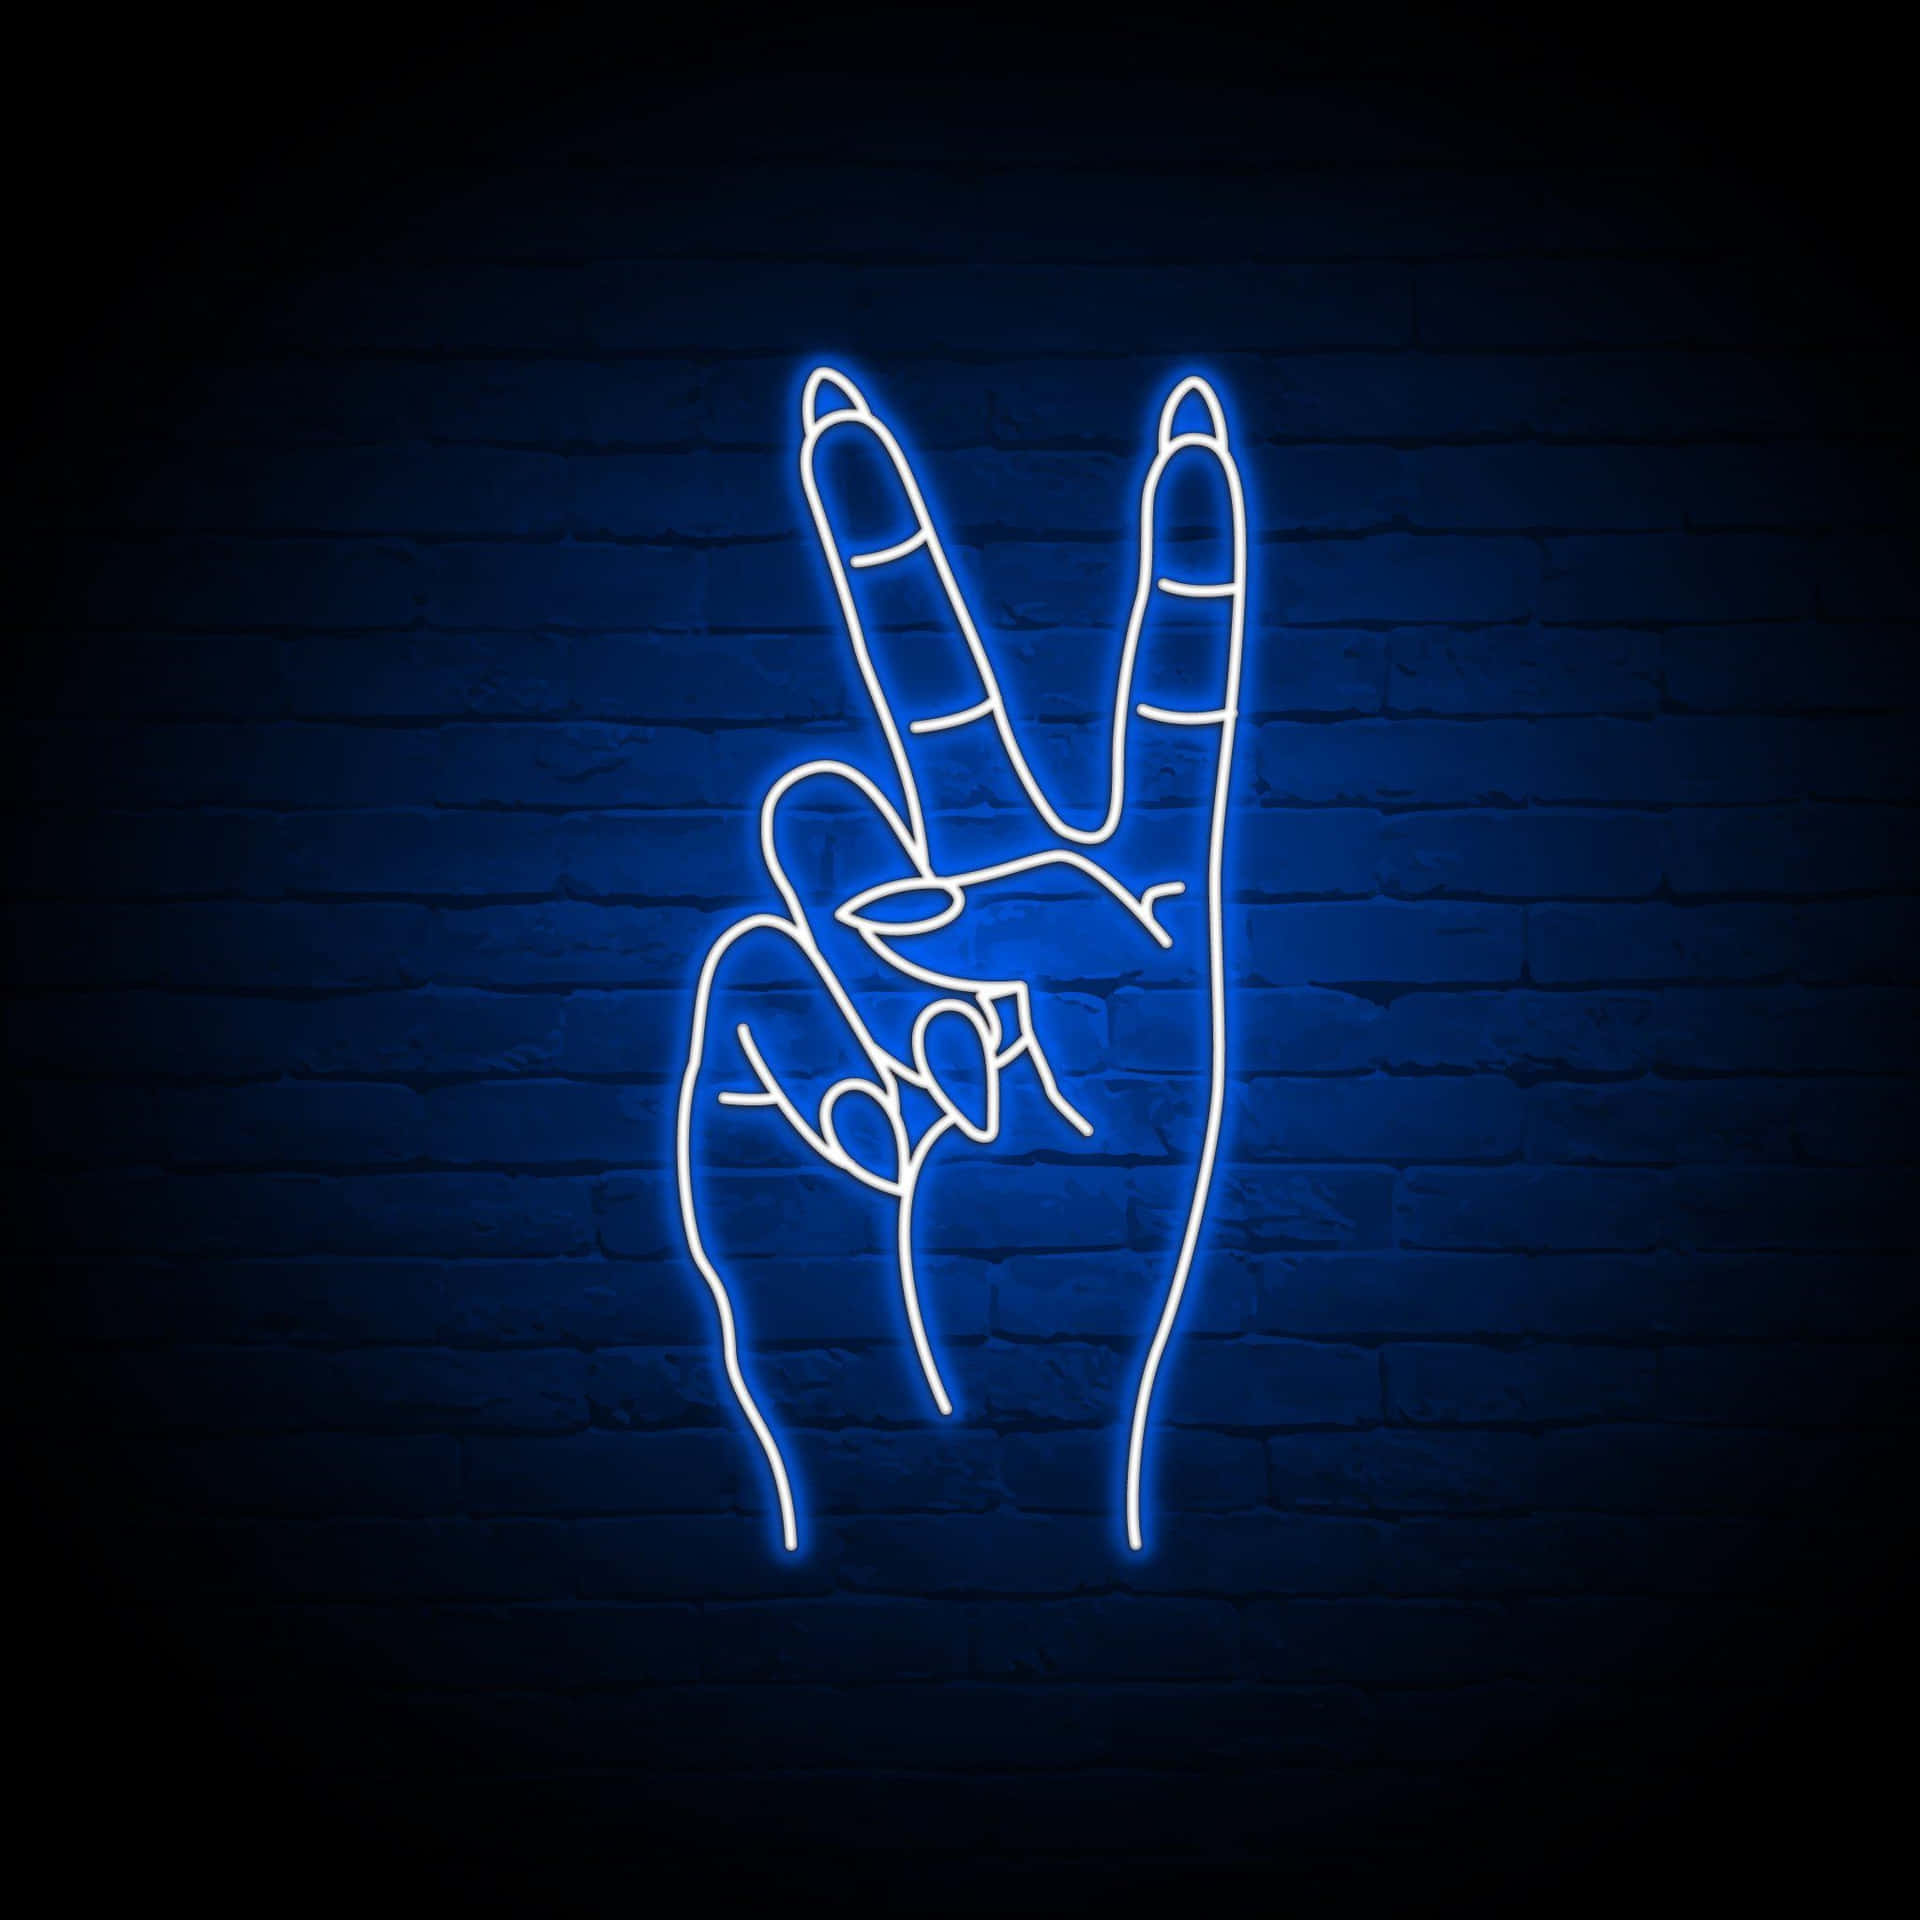 Electric Blue Neon Peace Sign Wallpaper